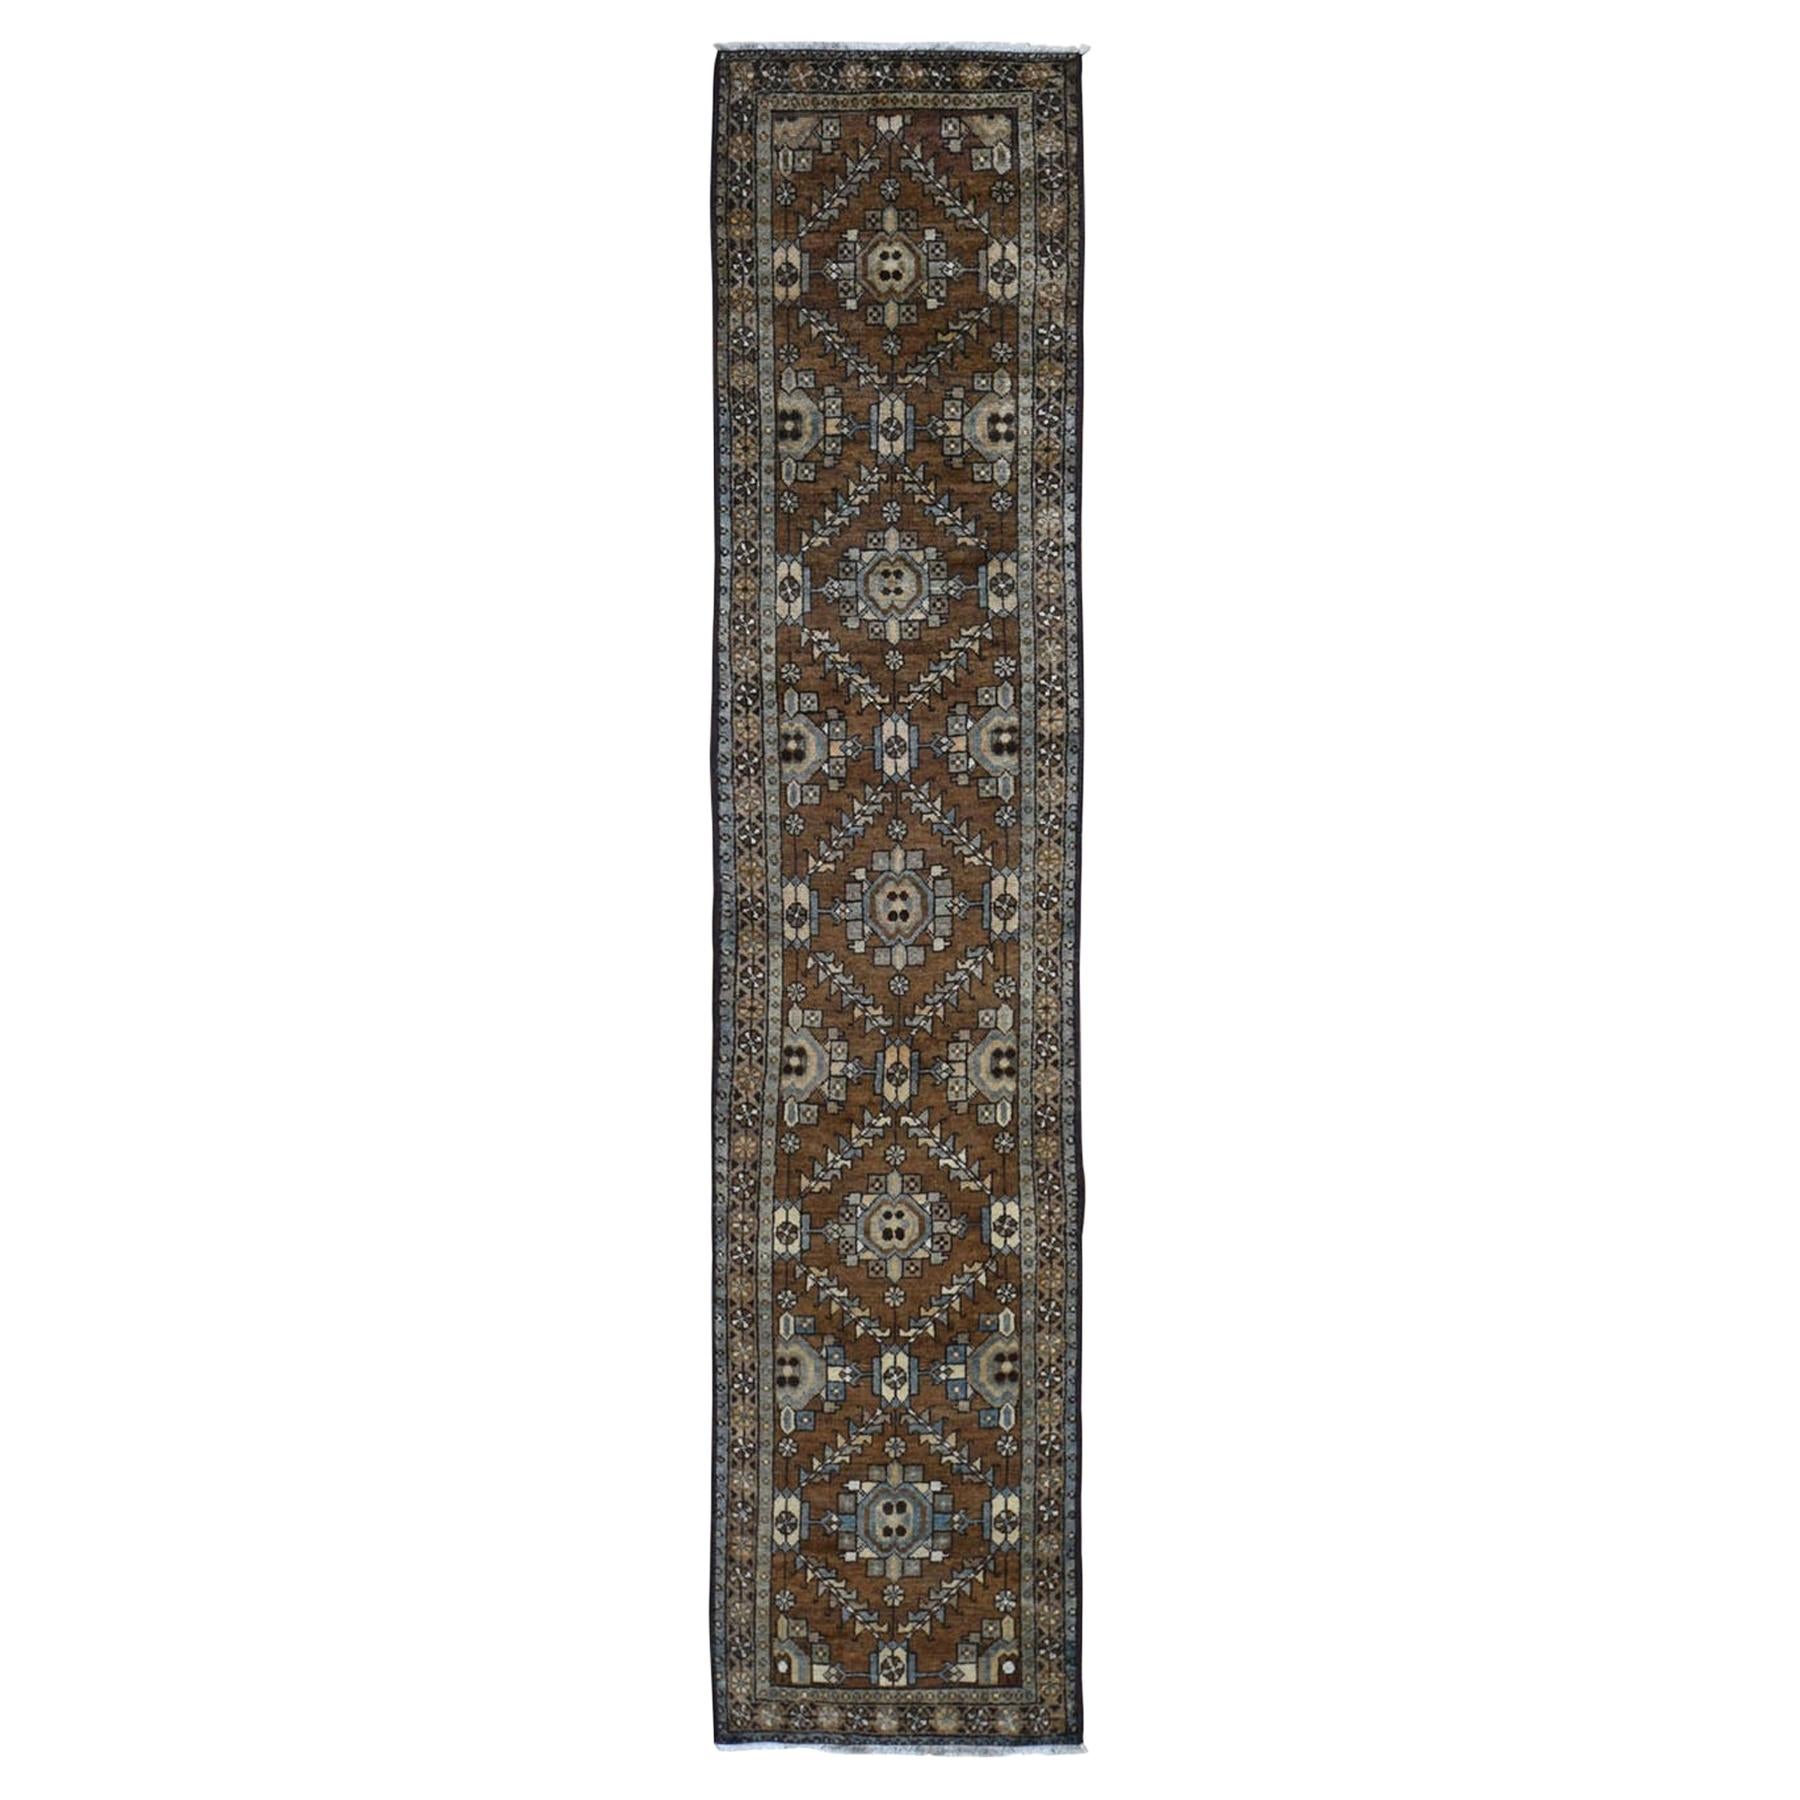 Brown Antique Persian Heriz With Soft Natural Colors Narrow Runner Rug